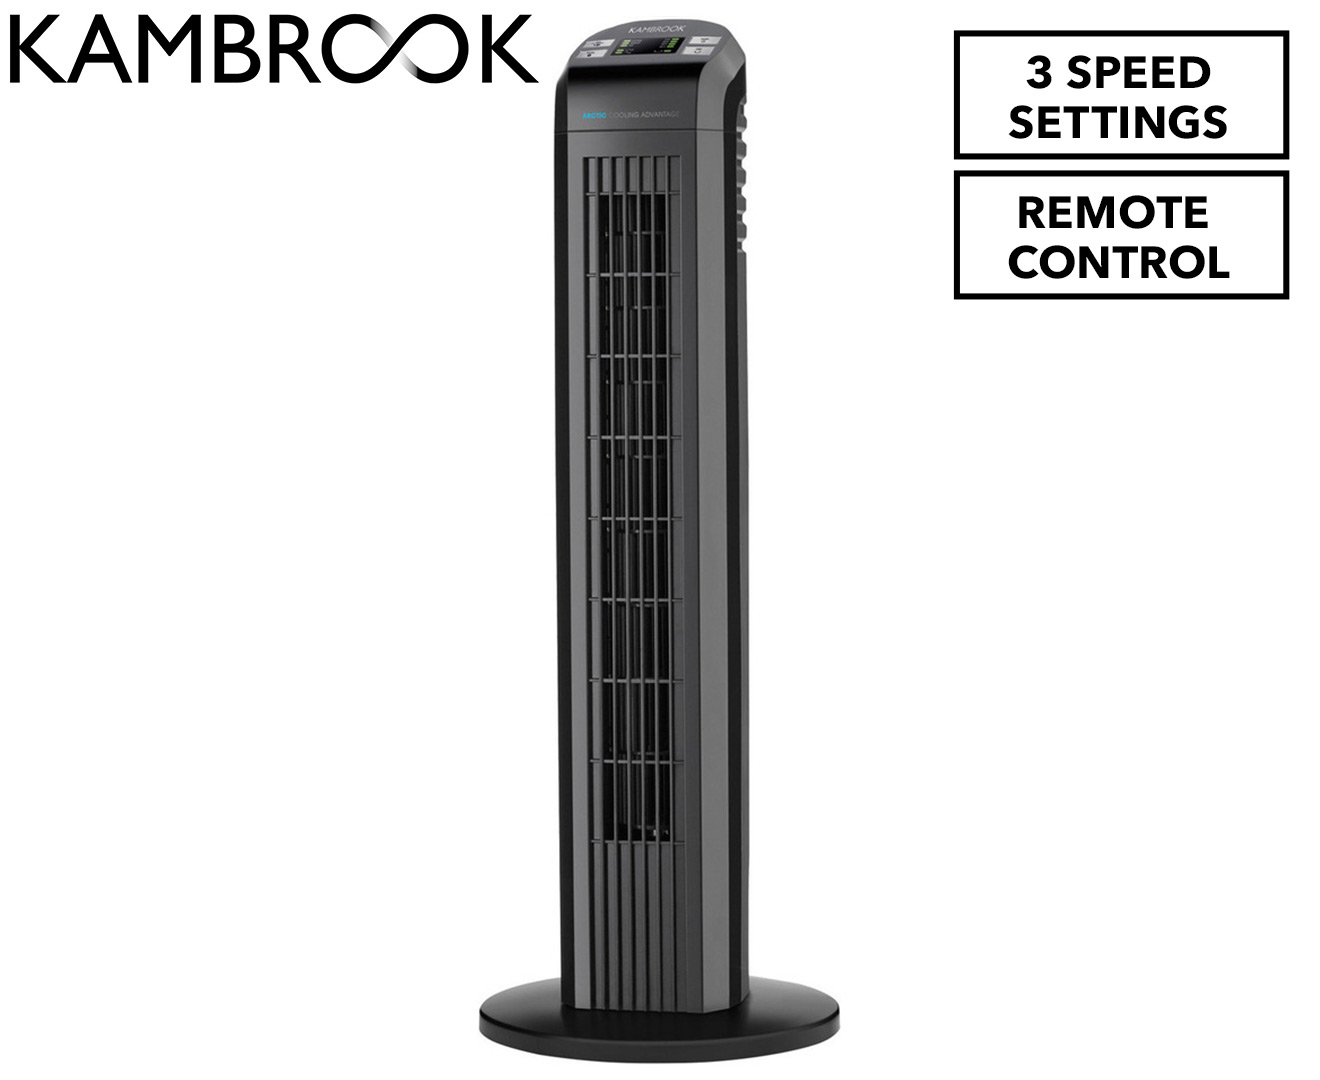 Kambrook 77cm Arctic Tower Fan W Remote Control pertaining to size 1320 X 1080